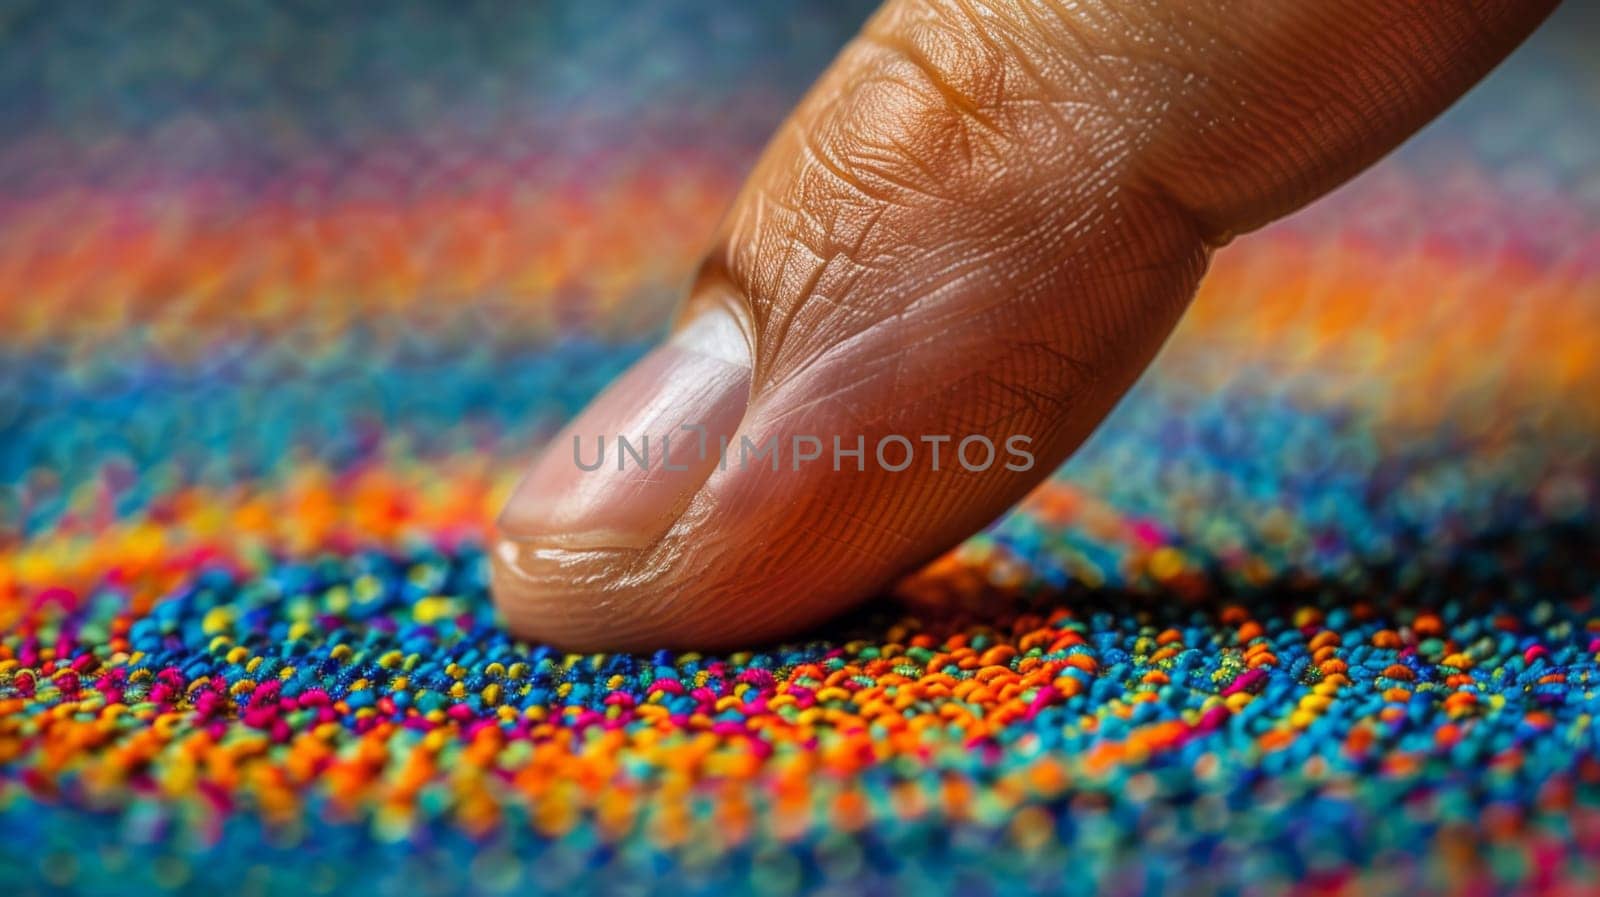 A finger is touching a colorful carpet with dots on it, AI by starush